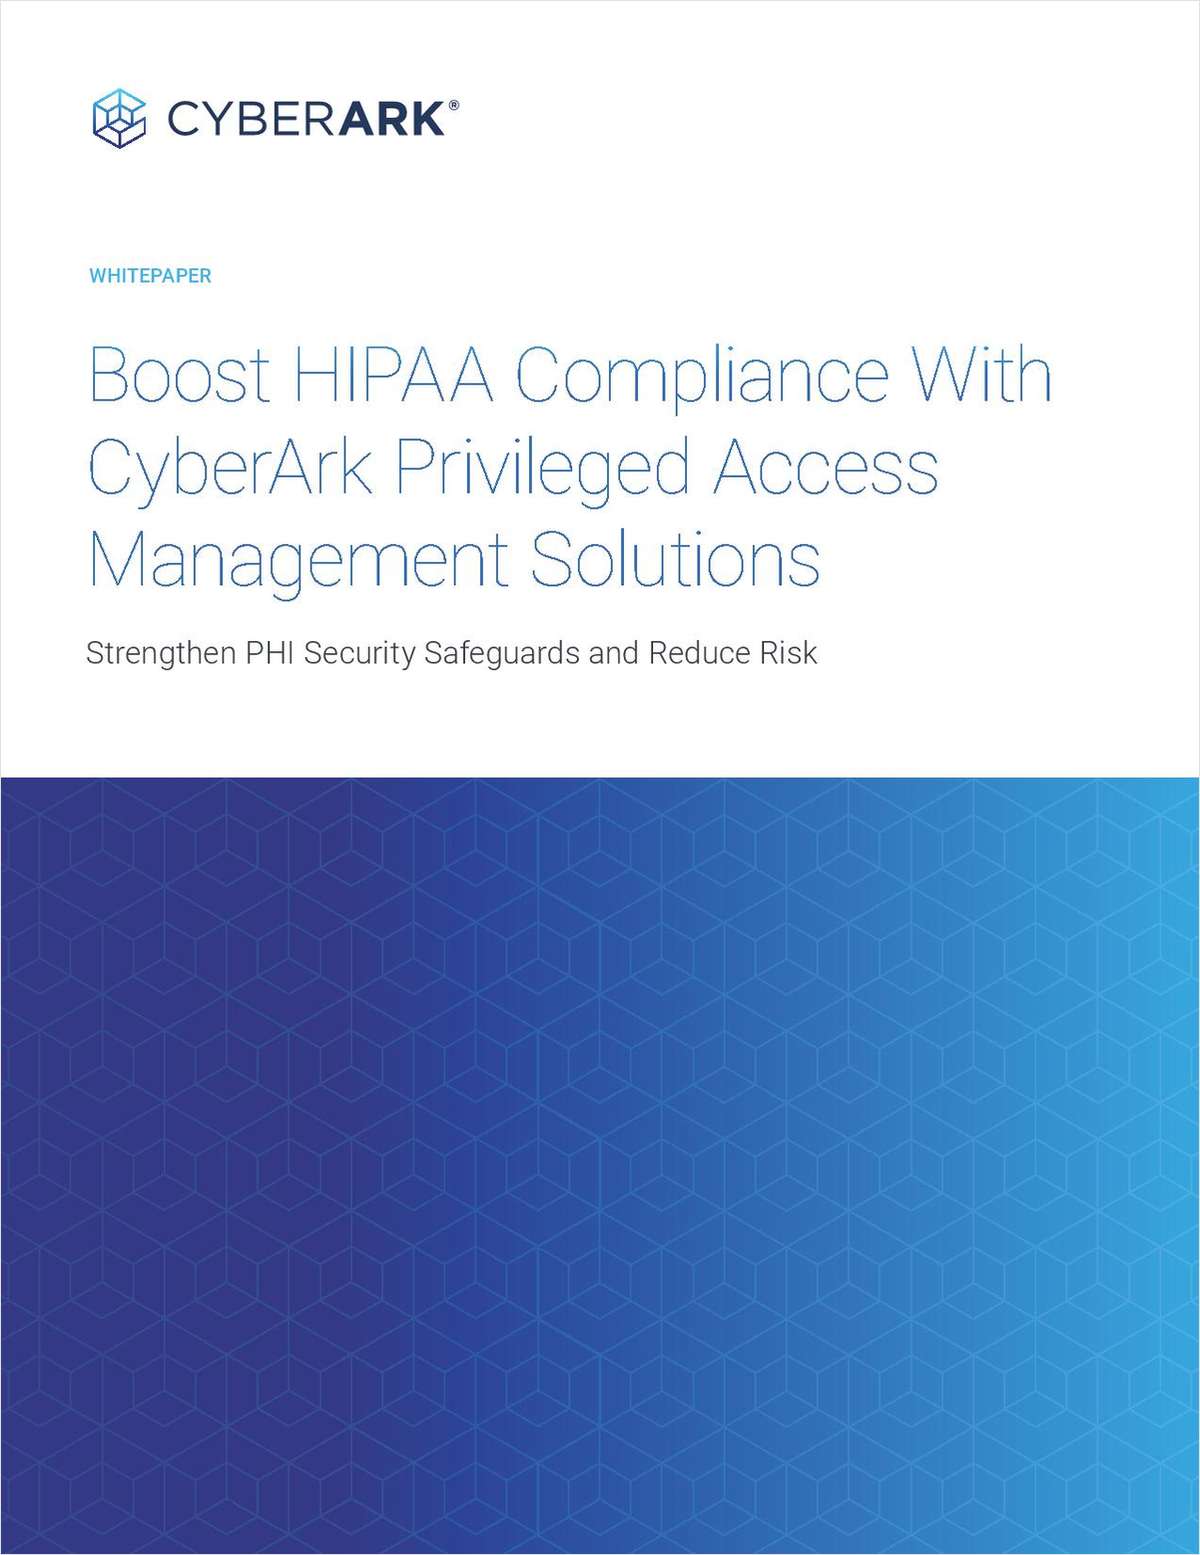 Boost HIPAA Compliance with CyberArk Privileged Access Management Solutions